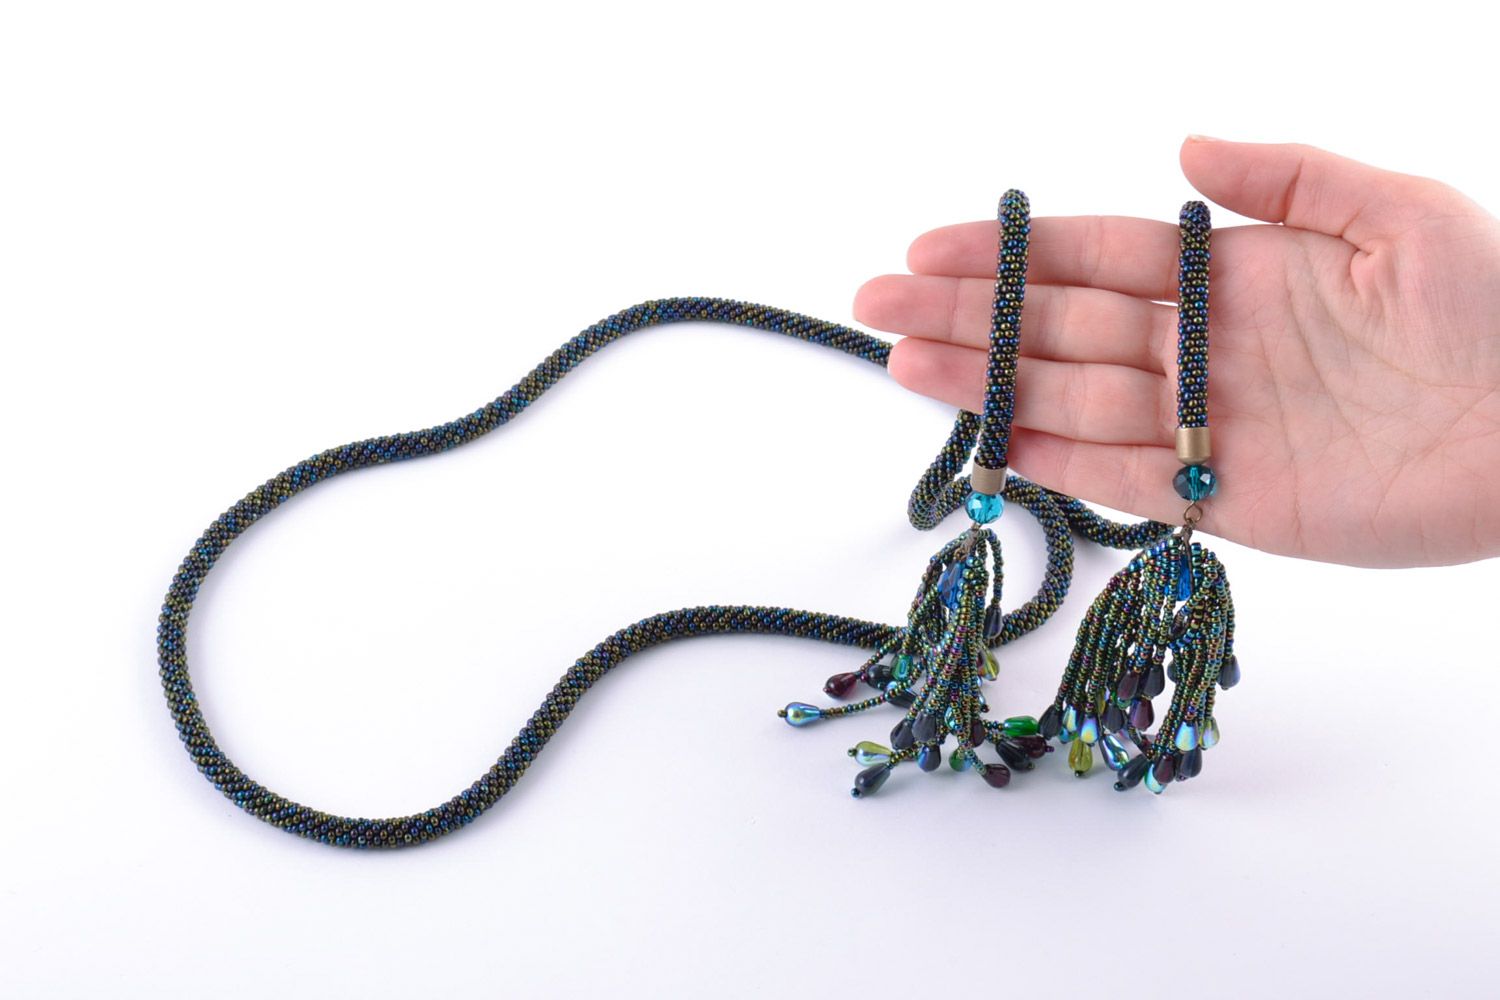 Handmade dark transformer jewelry belt and necklace woven of beads with tassels photo 2